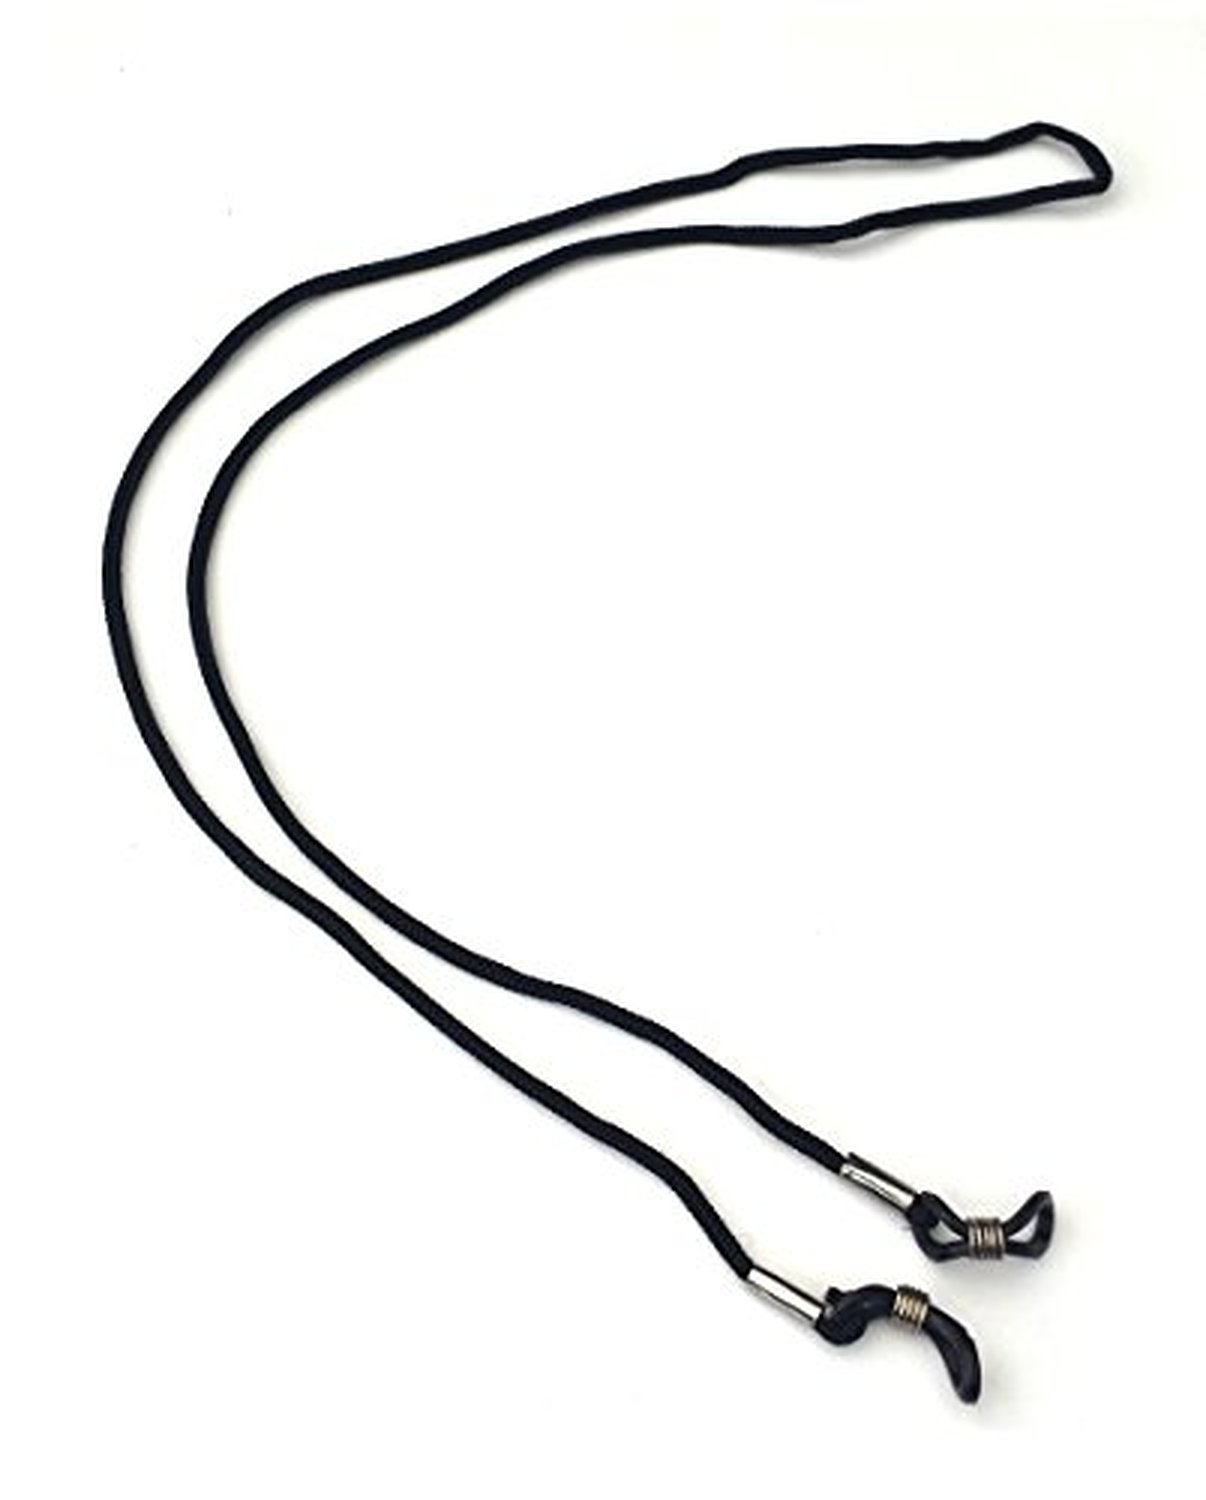 Glasses Sunglasses Spectacles Cord Neck Lanyard String Chain Safety ...